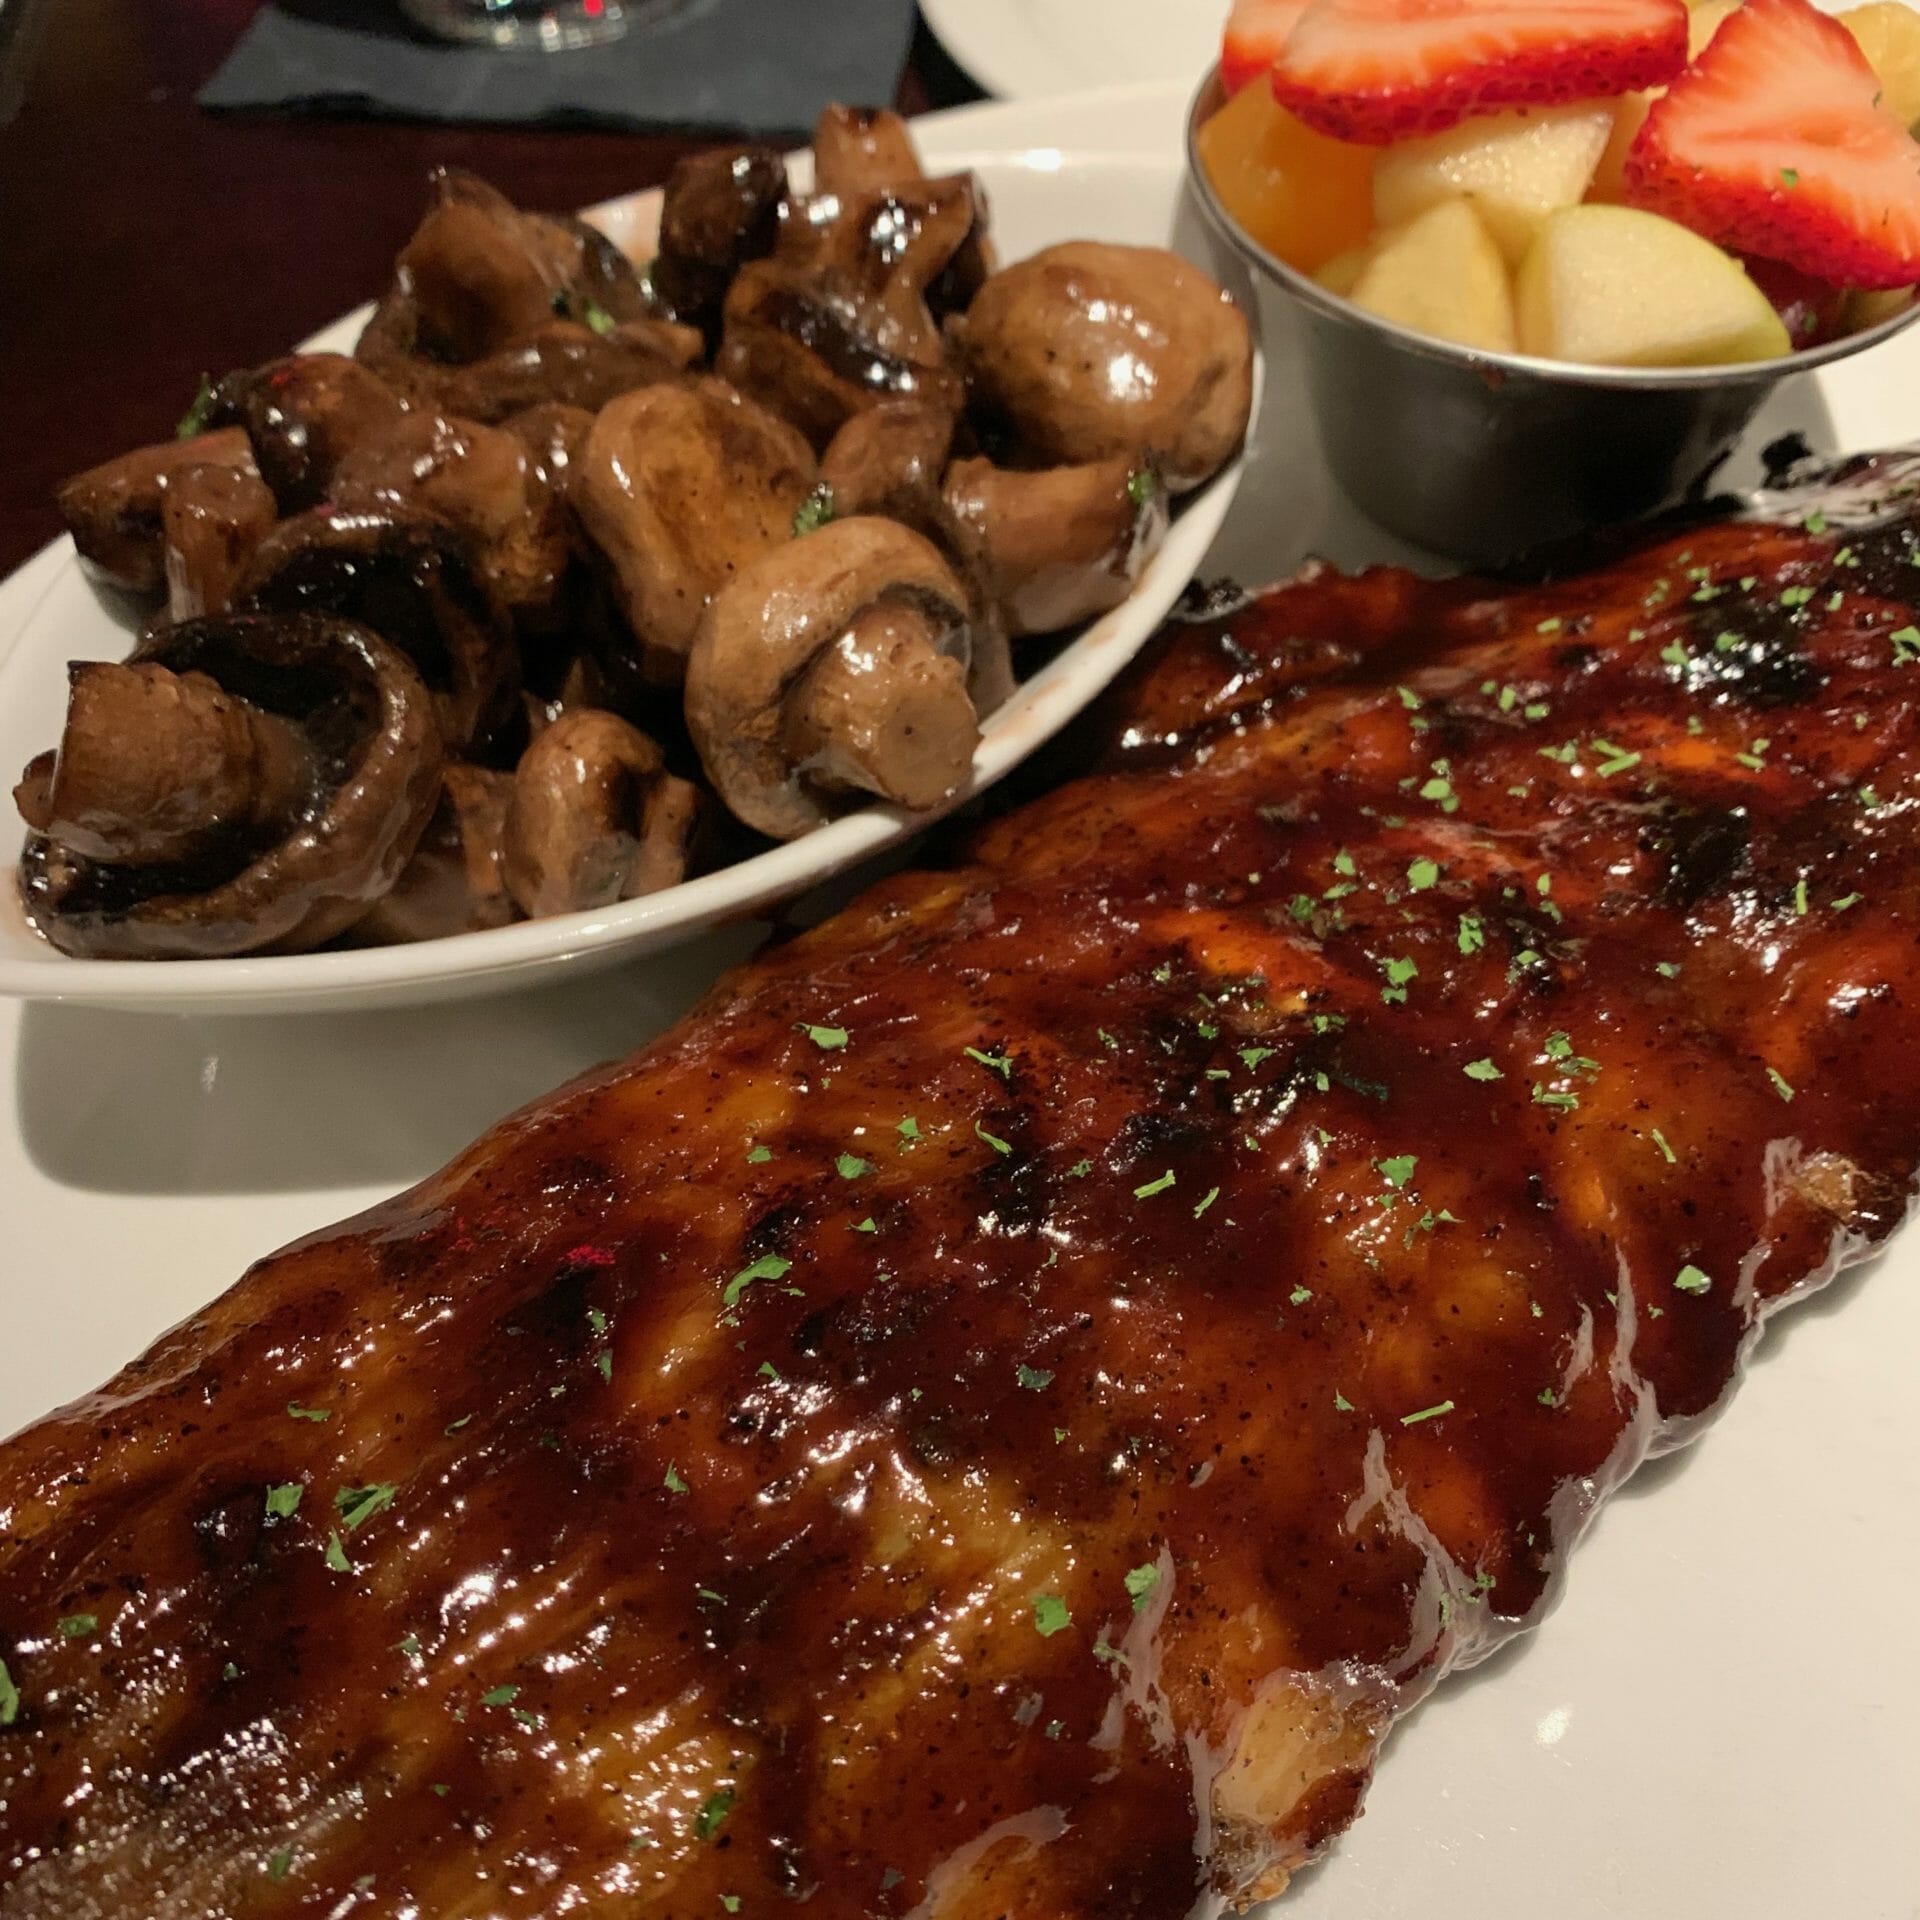 Ribs with a sauce that had way too much sugar, sautéed mushrooms and fresh fruit (Firebird Grill)